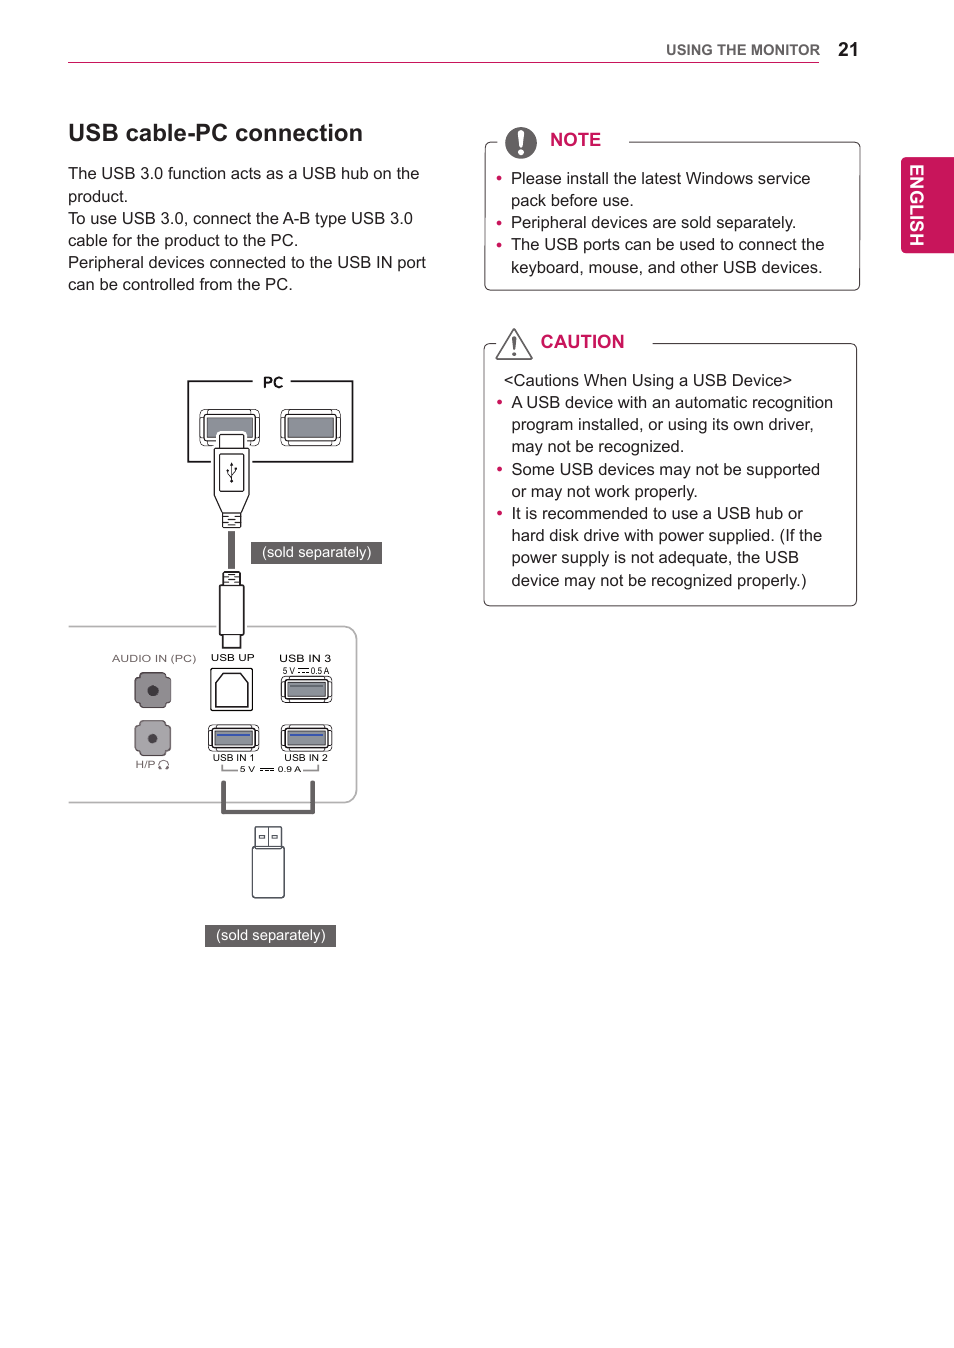 Usb cable-pc connection, English, Caution | LG 29EA73-P User Manual | Page 21 / 39